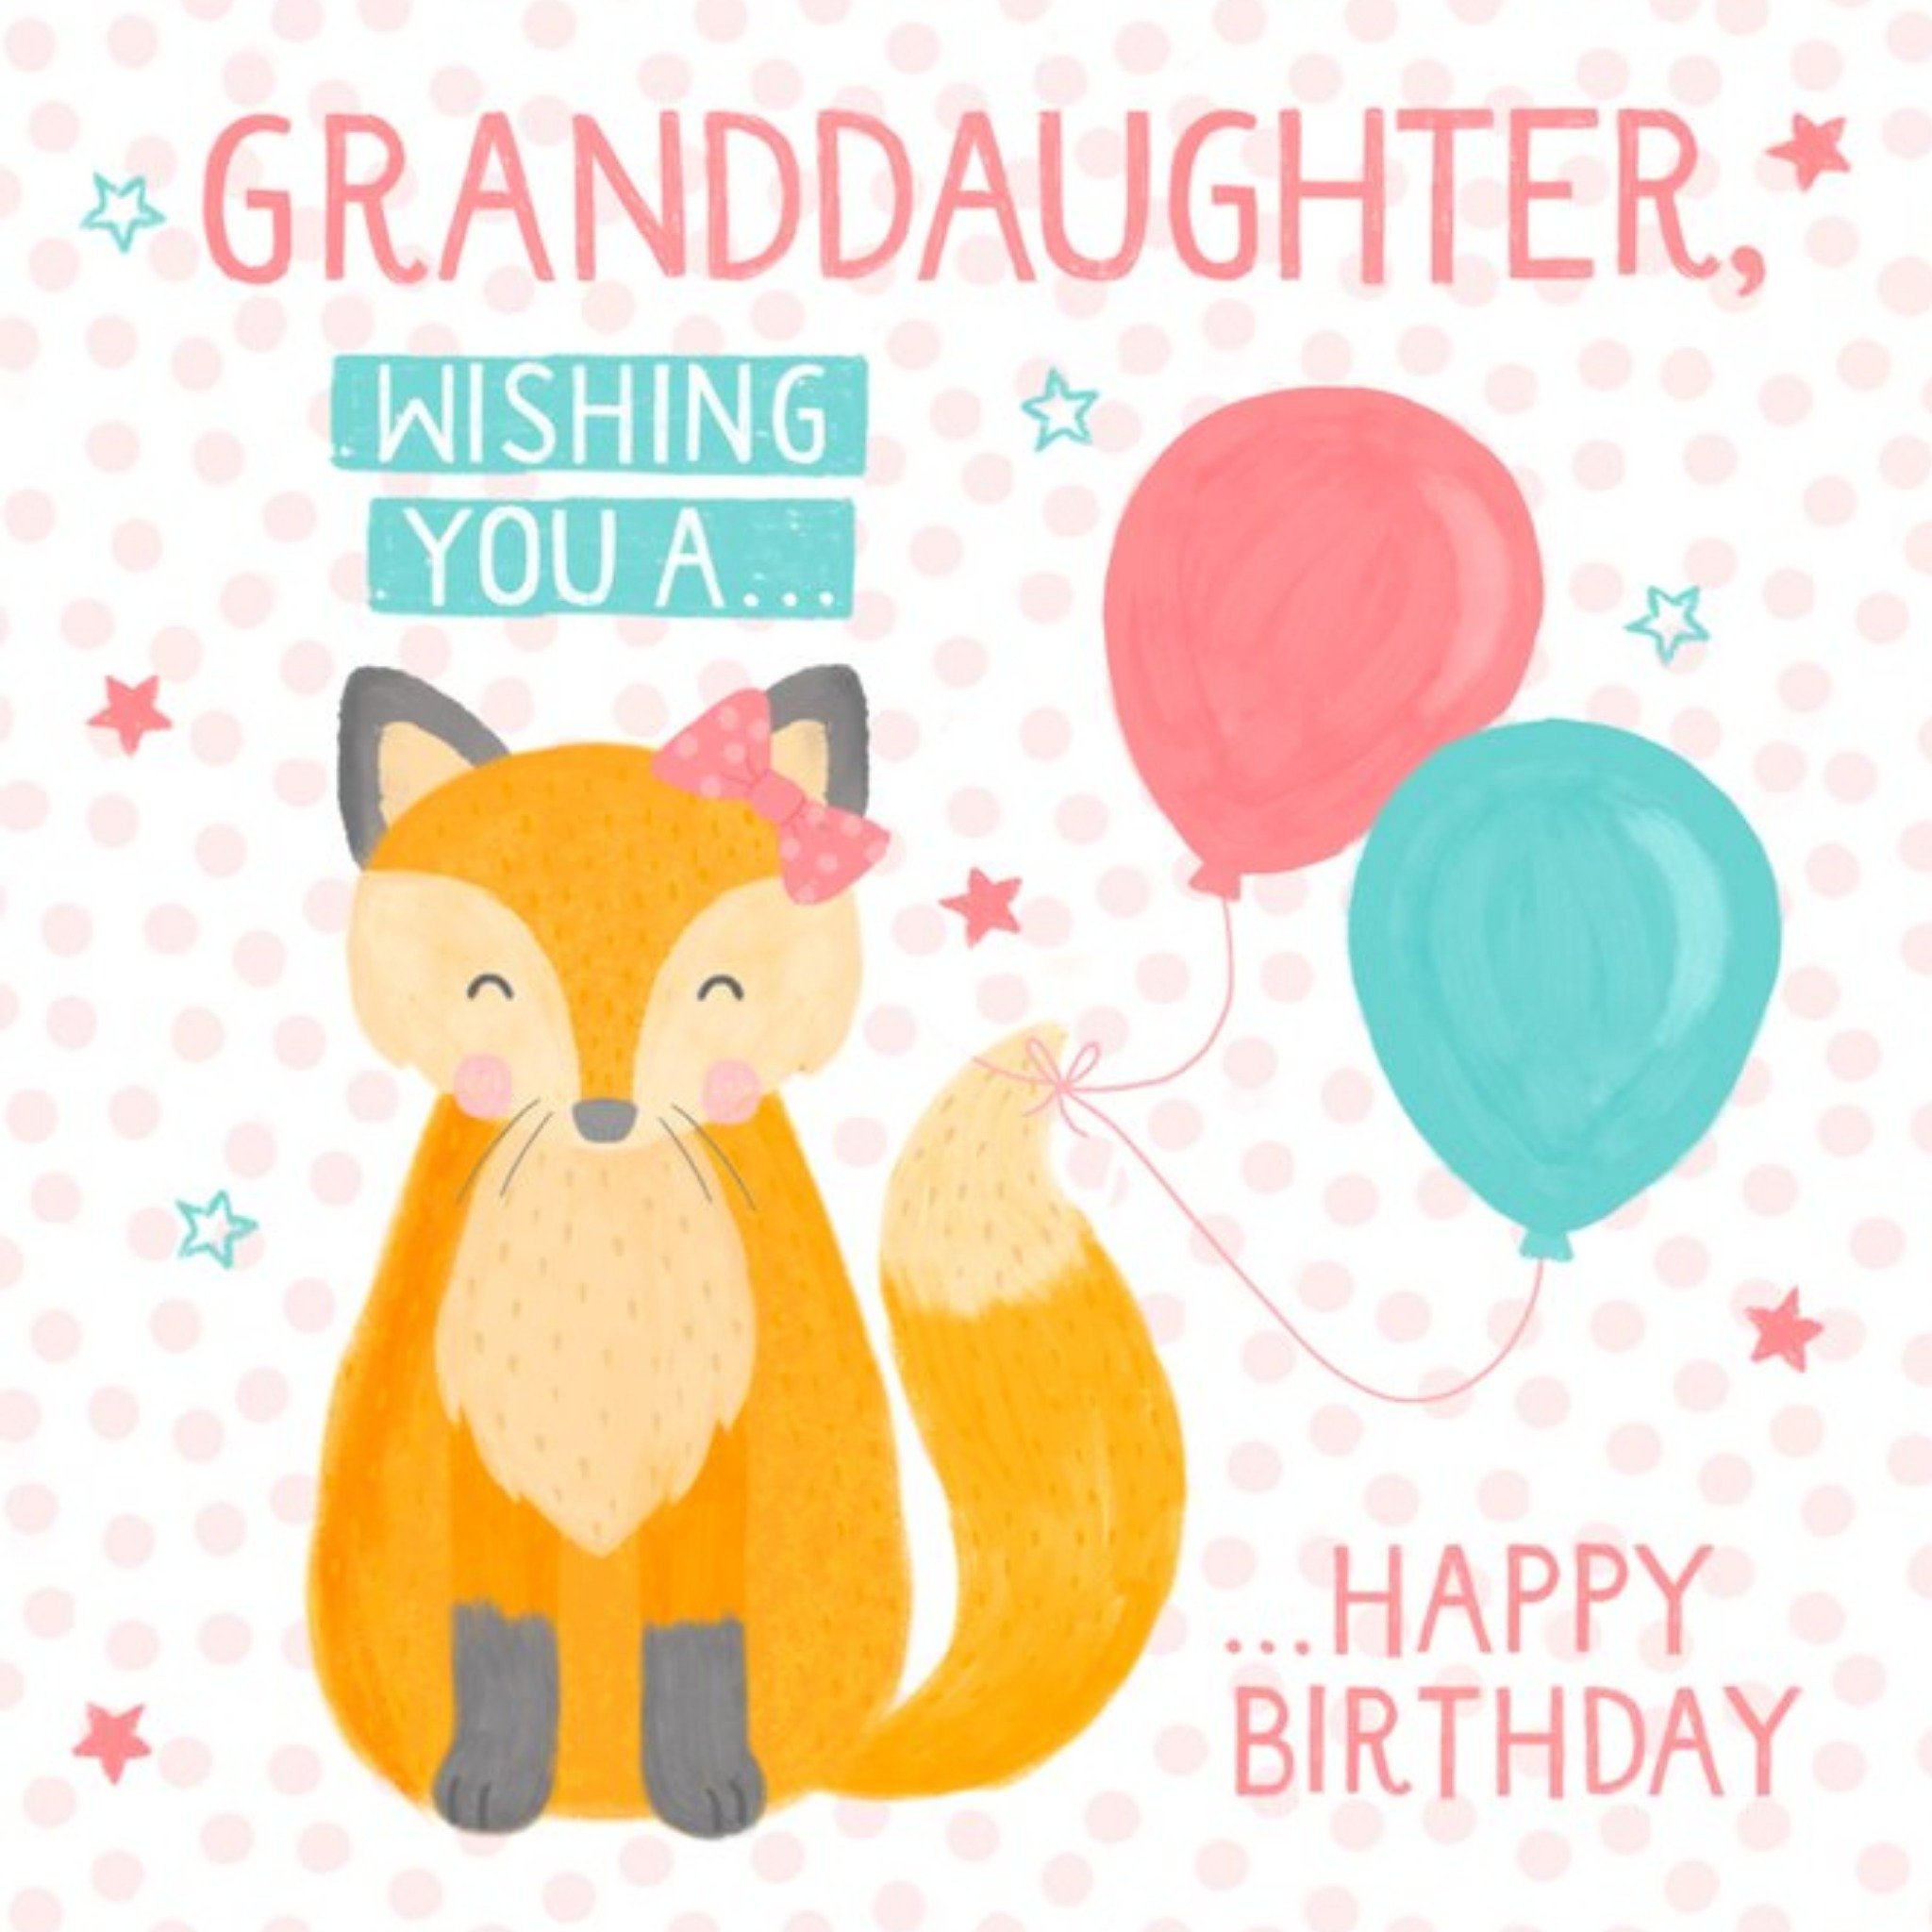 Moonpig Cute Illustrated Fox With Birthday Balloons Granddaughter Birthday Card, Square